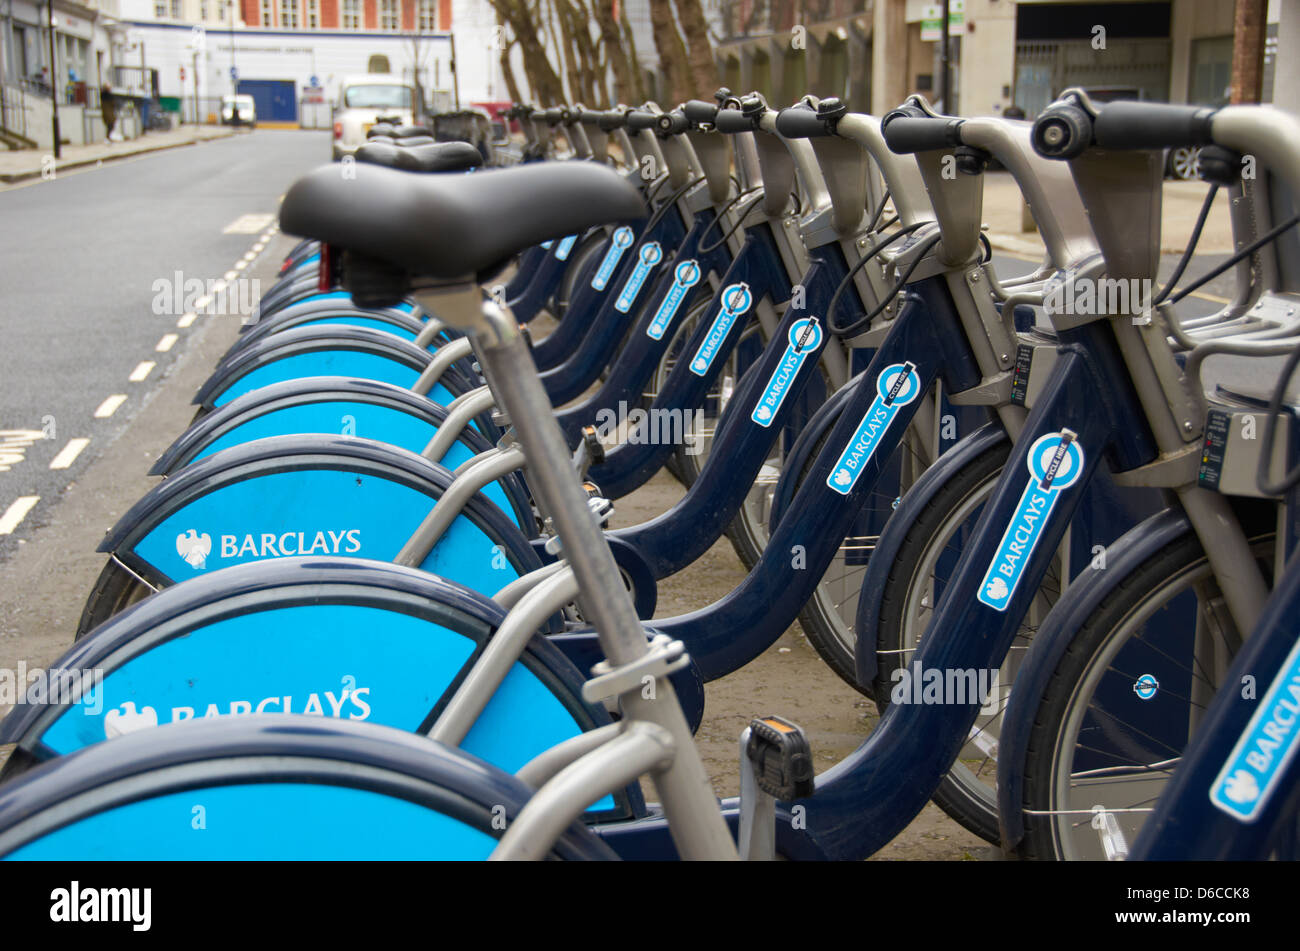 Cycle hire stations in London Stock Photo